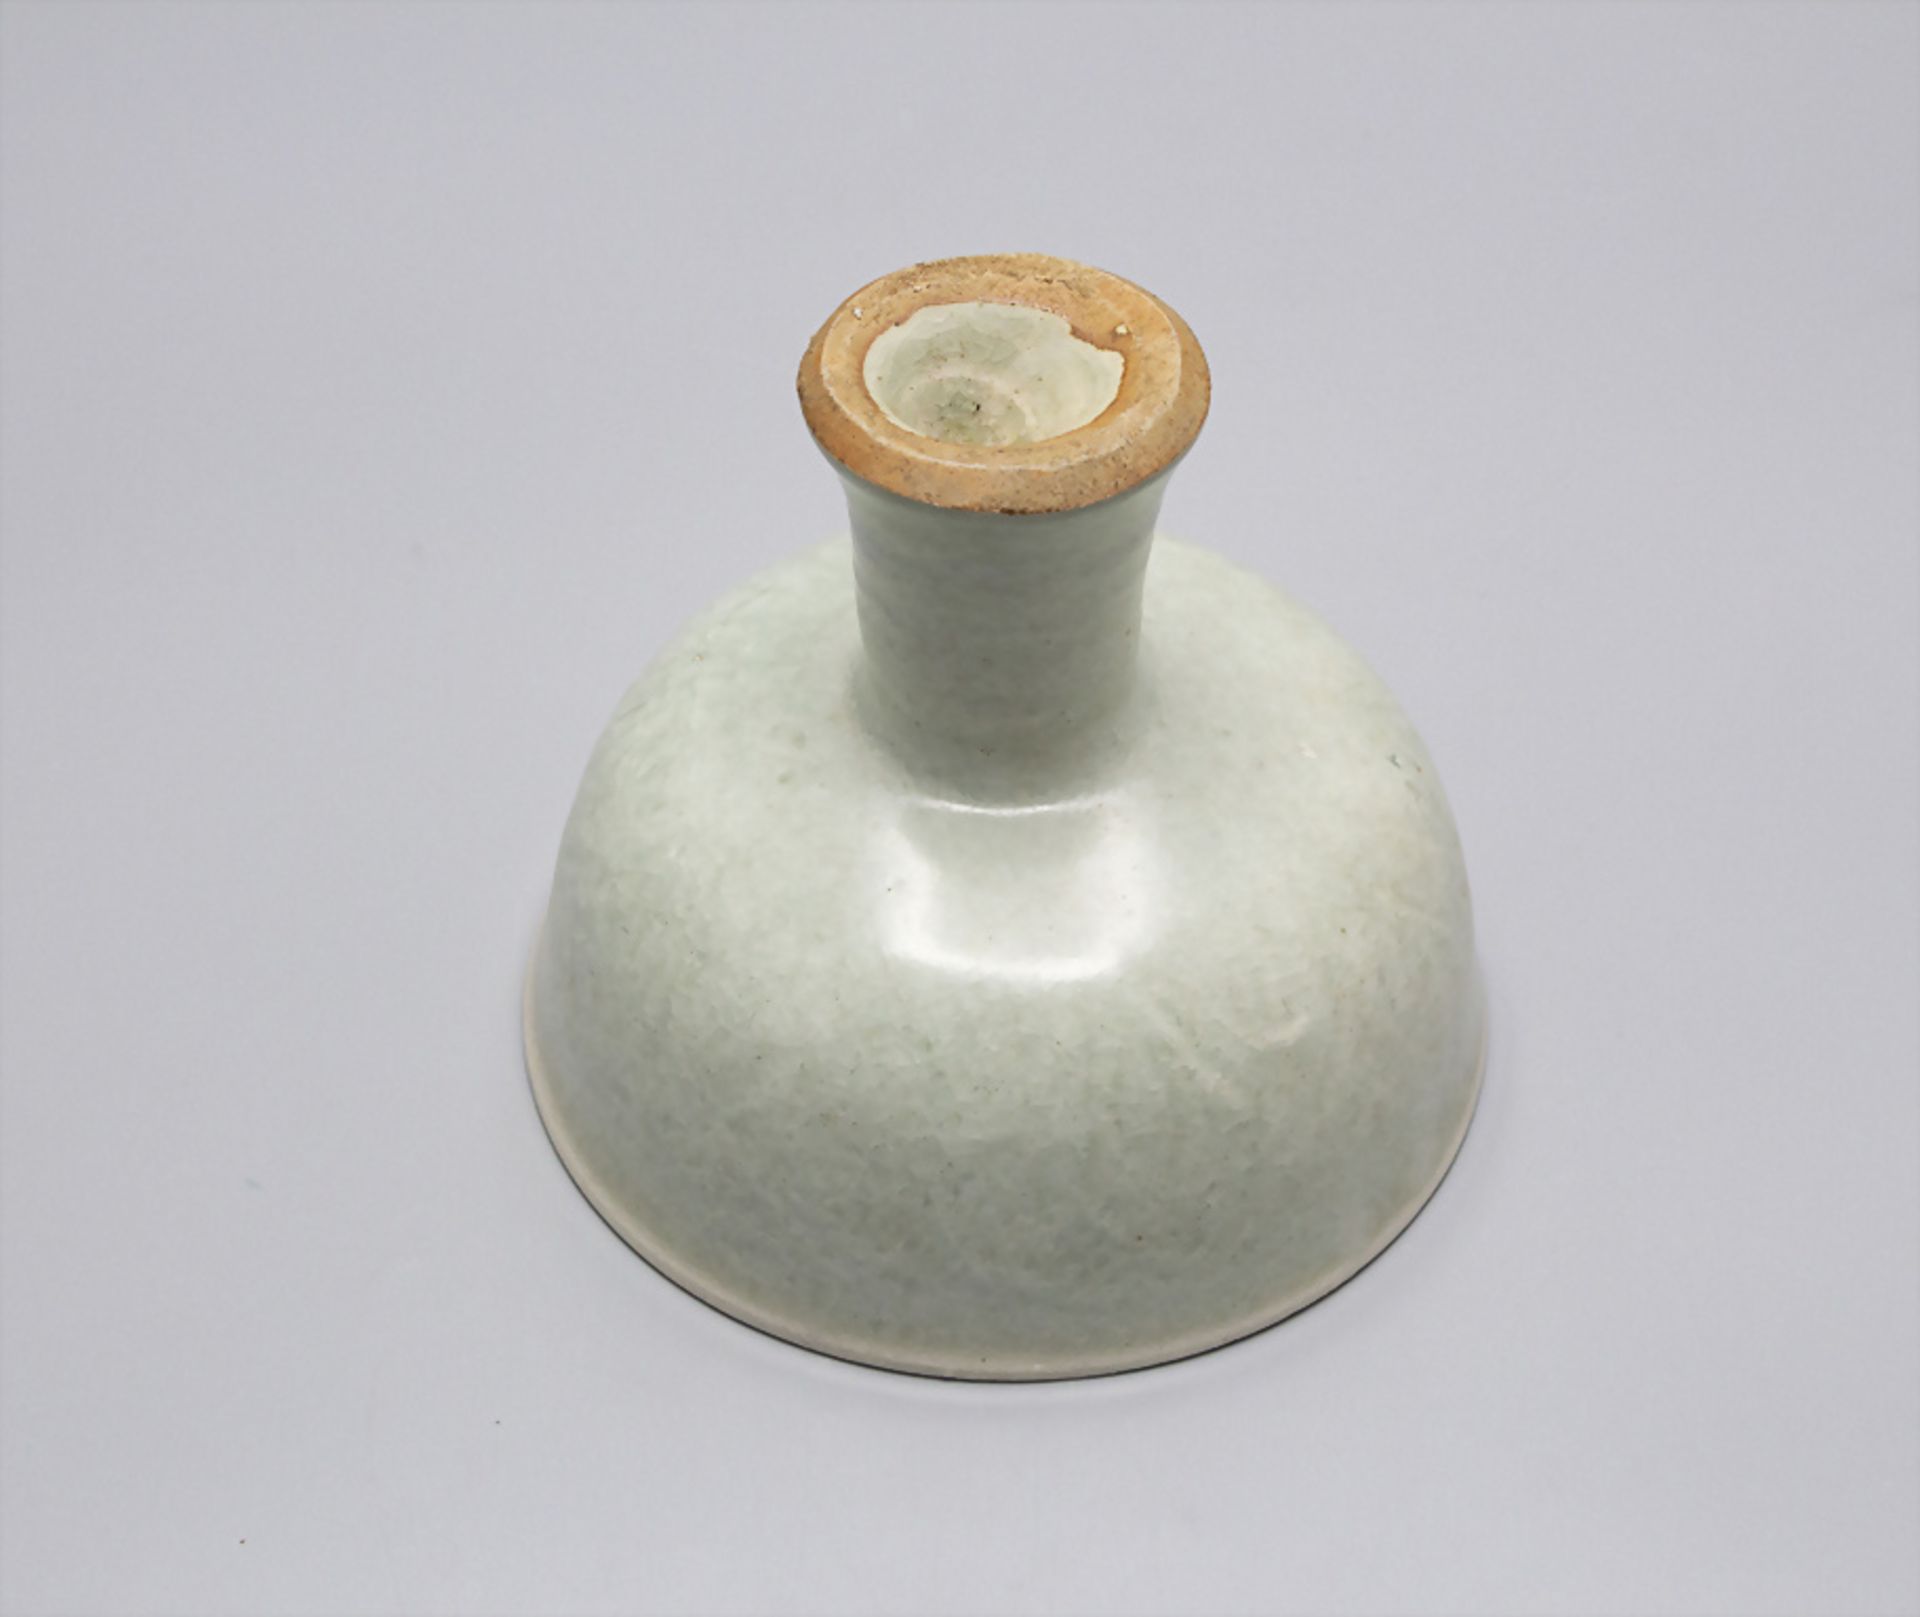 Seladon Fußbecher / A celadon footed cup 'slamp cup', China, Qing-Zeit, 19.-20. Jh. - Image 4 of 4